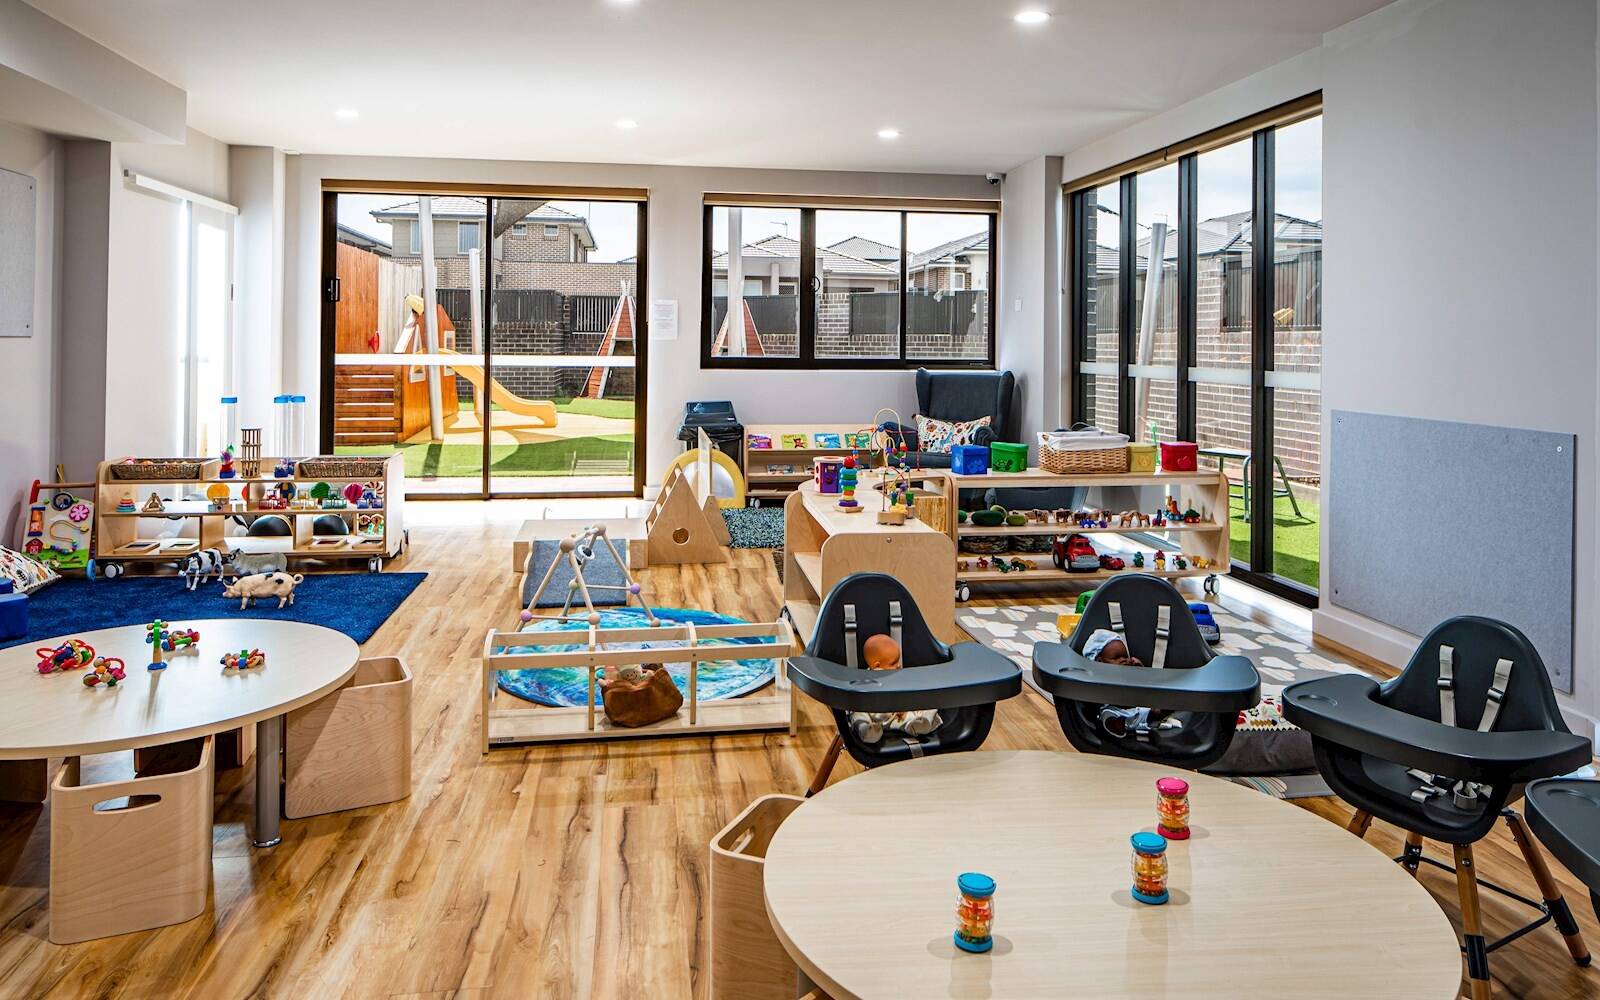 Young Academics Early Learning Centre - Tallawong